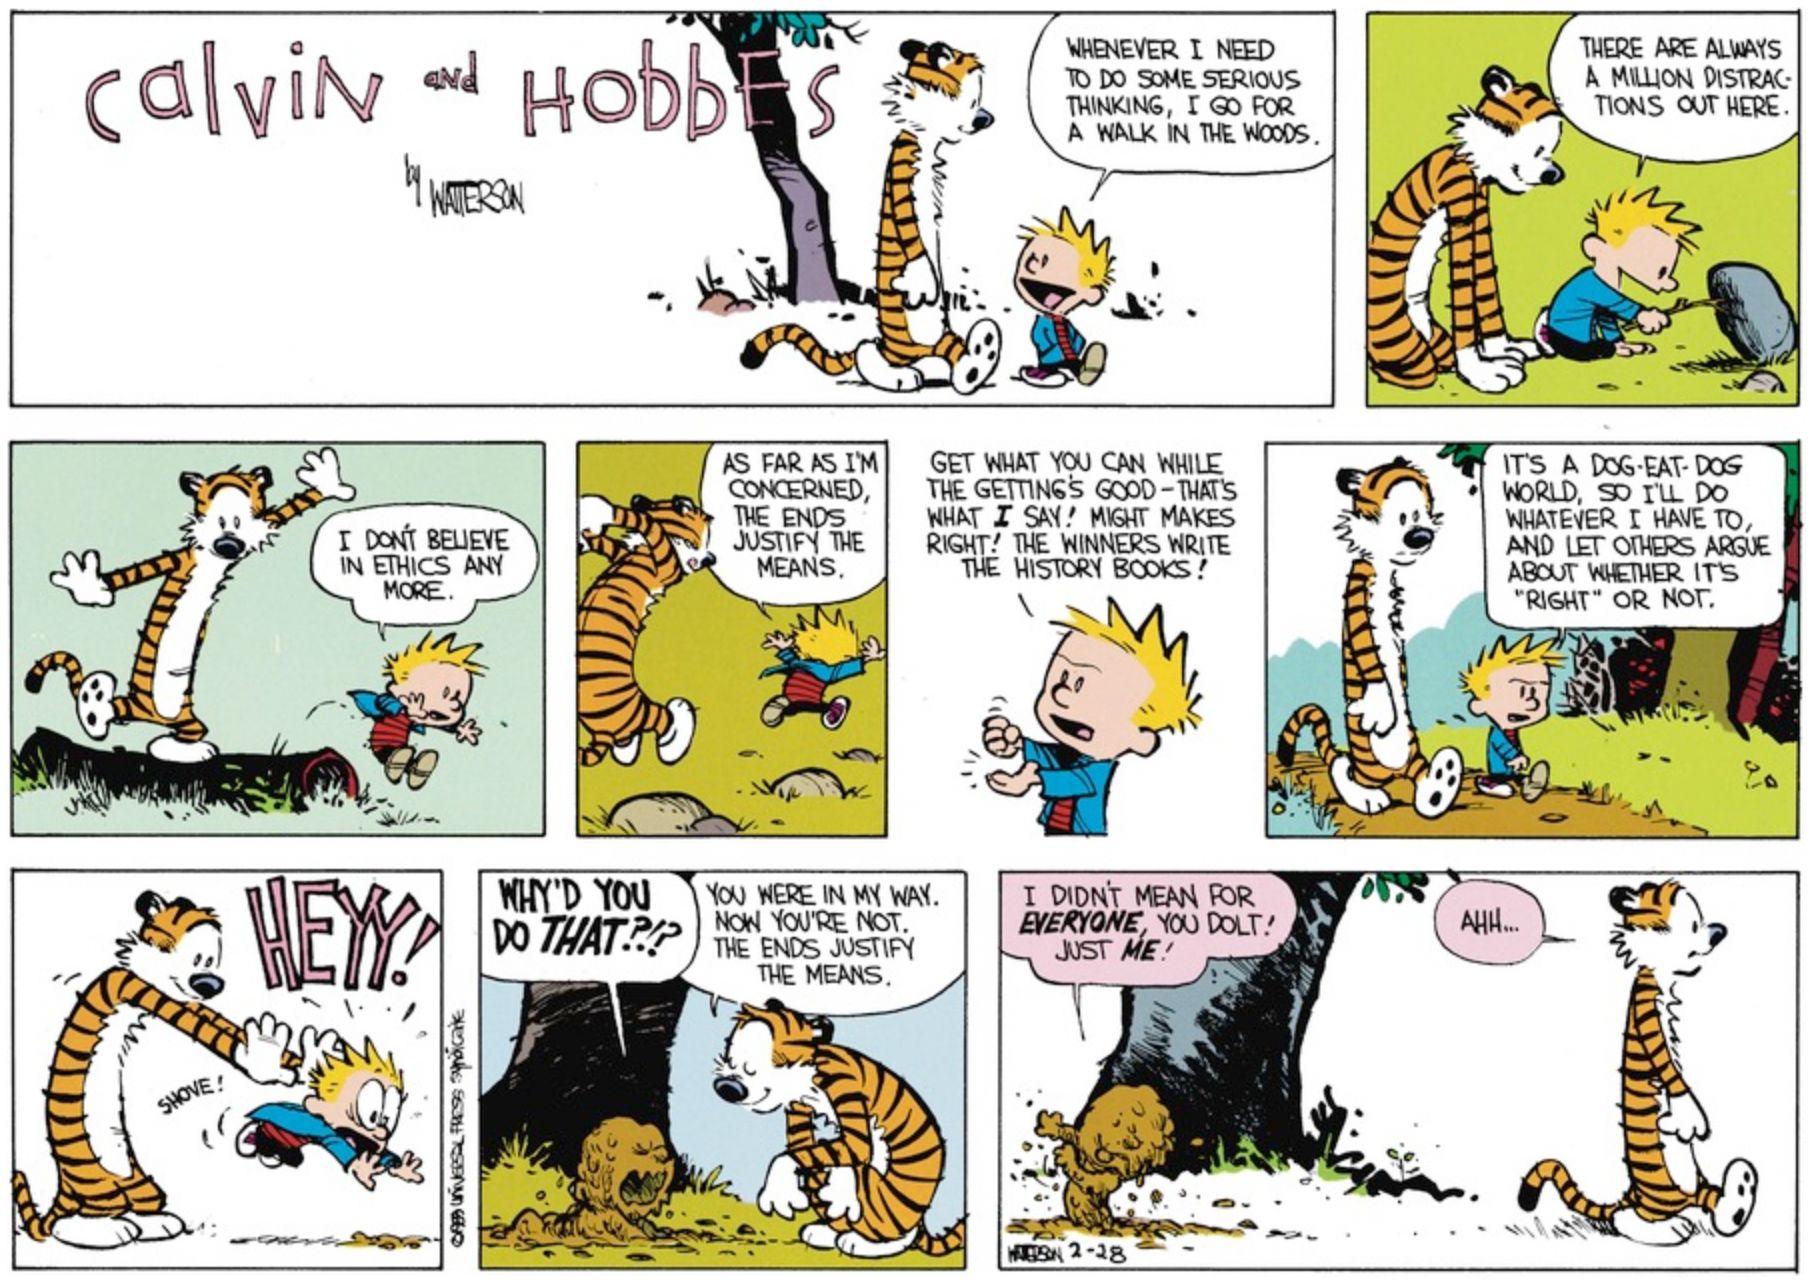 Ends Justify the Means in Calvin and Hobbes